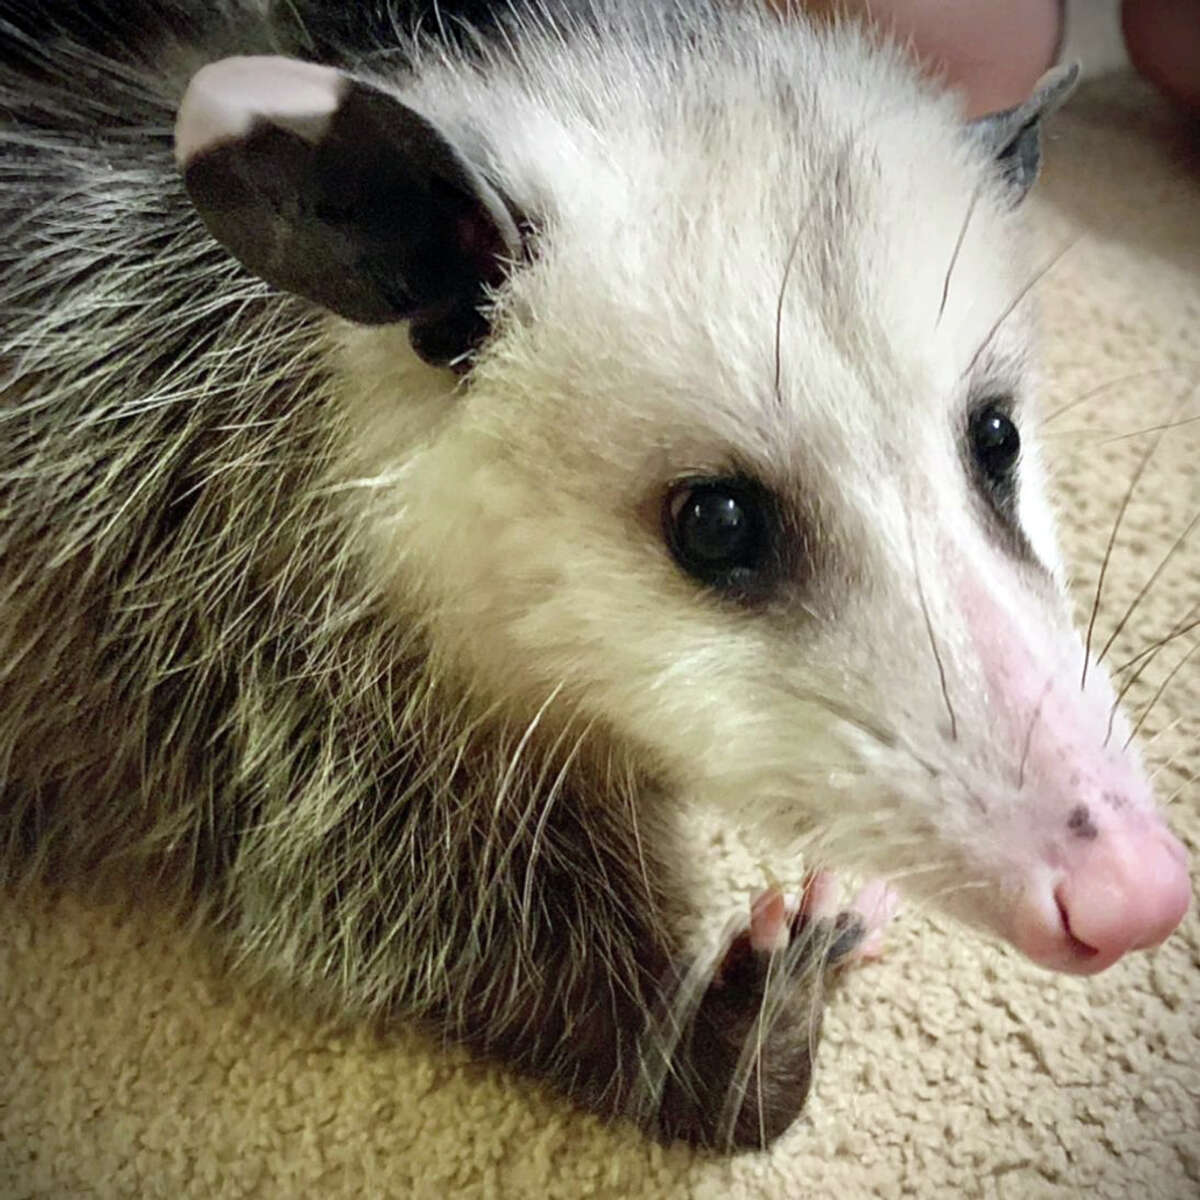 Meet Dahlia, Farm River Wildlife's opossum ambassador, who will be featured at the event for the first time.